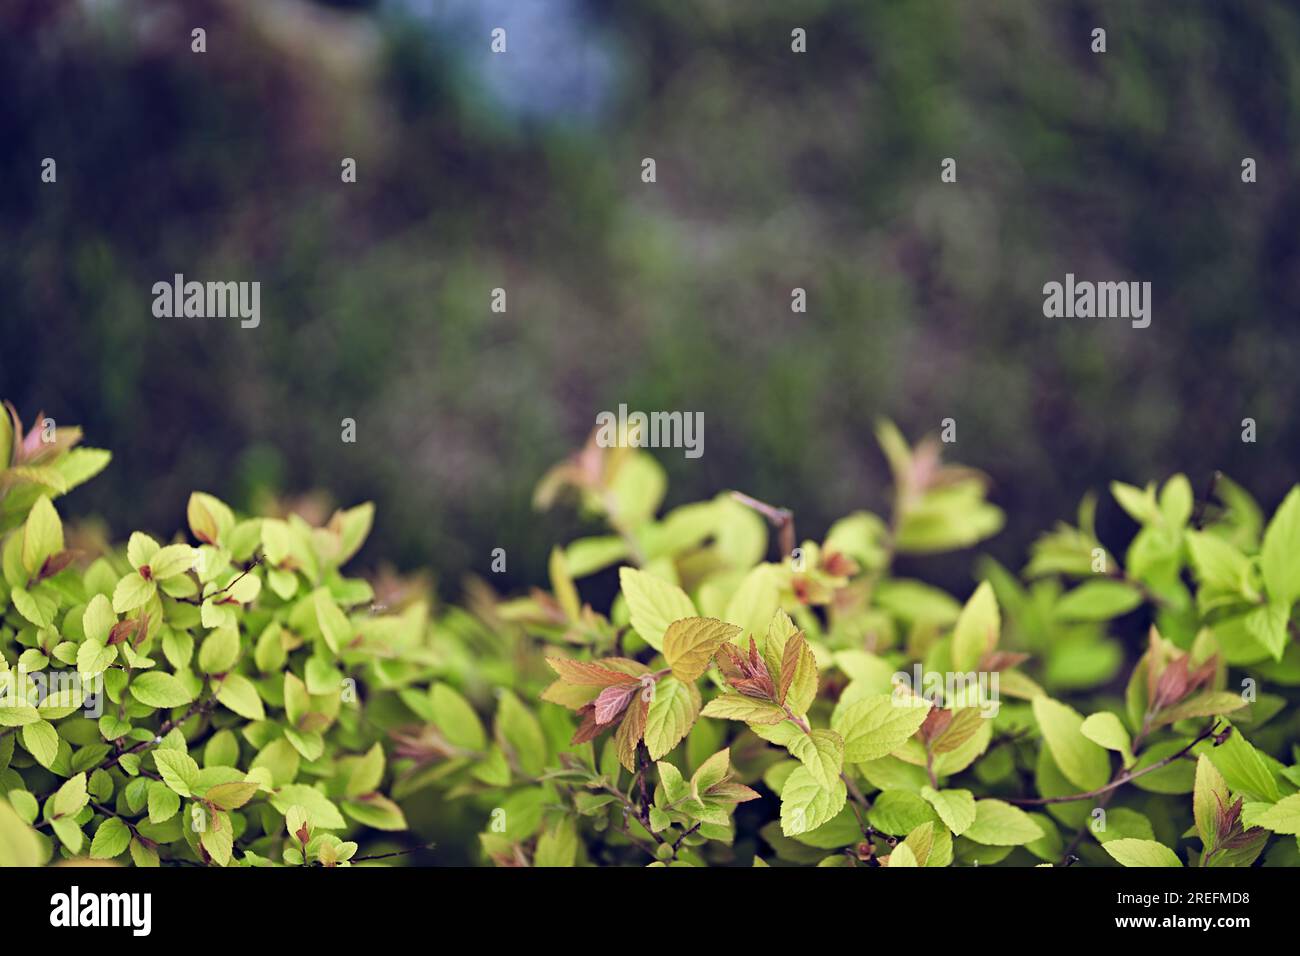 Natural organic background. An ornamental plant in the garden of Japanese spirea. Eco-wall. Textured background of small green leaves on a blurry background. Clean environment. High quality photo Stock Photo